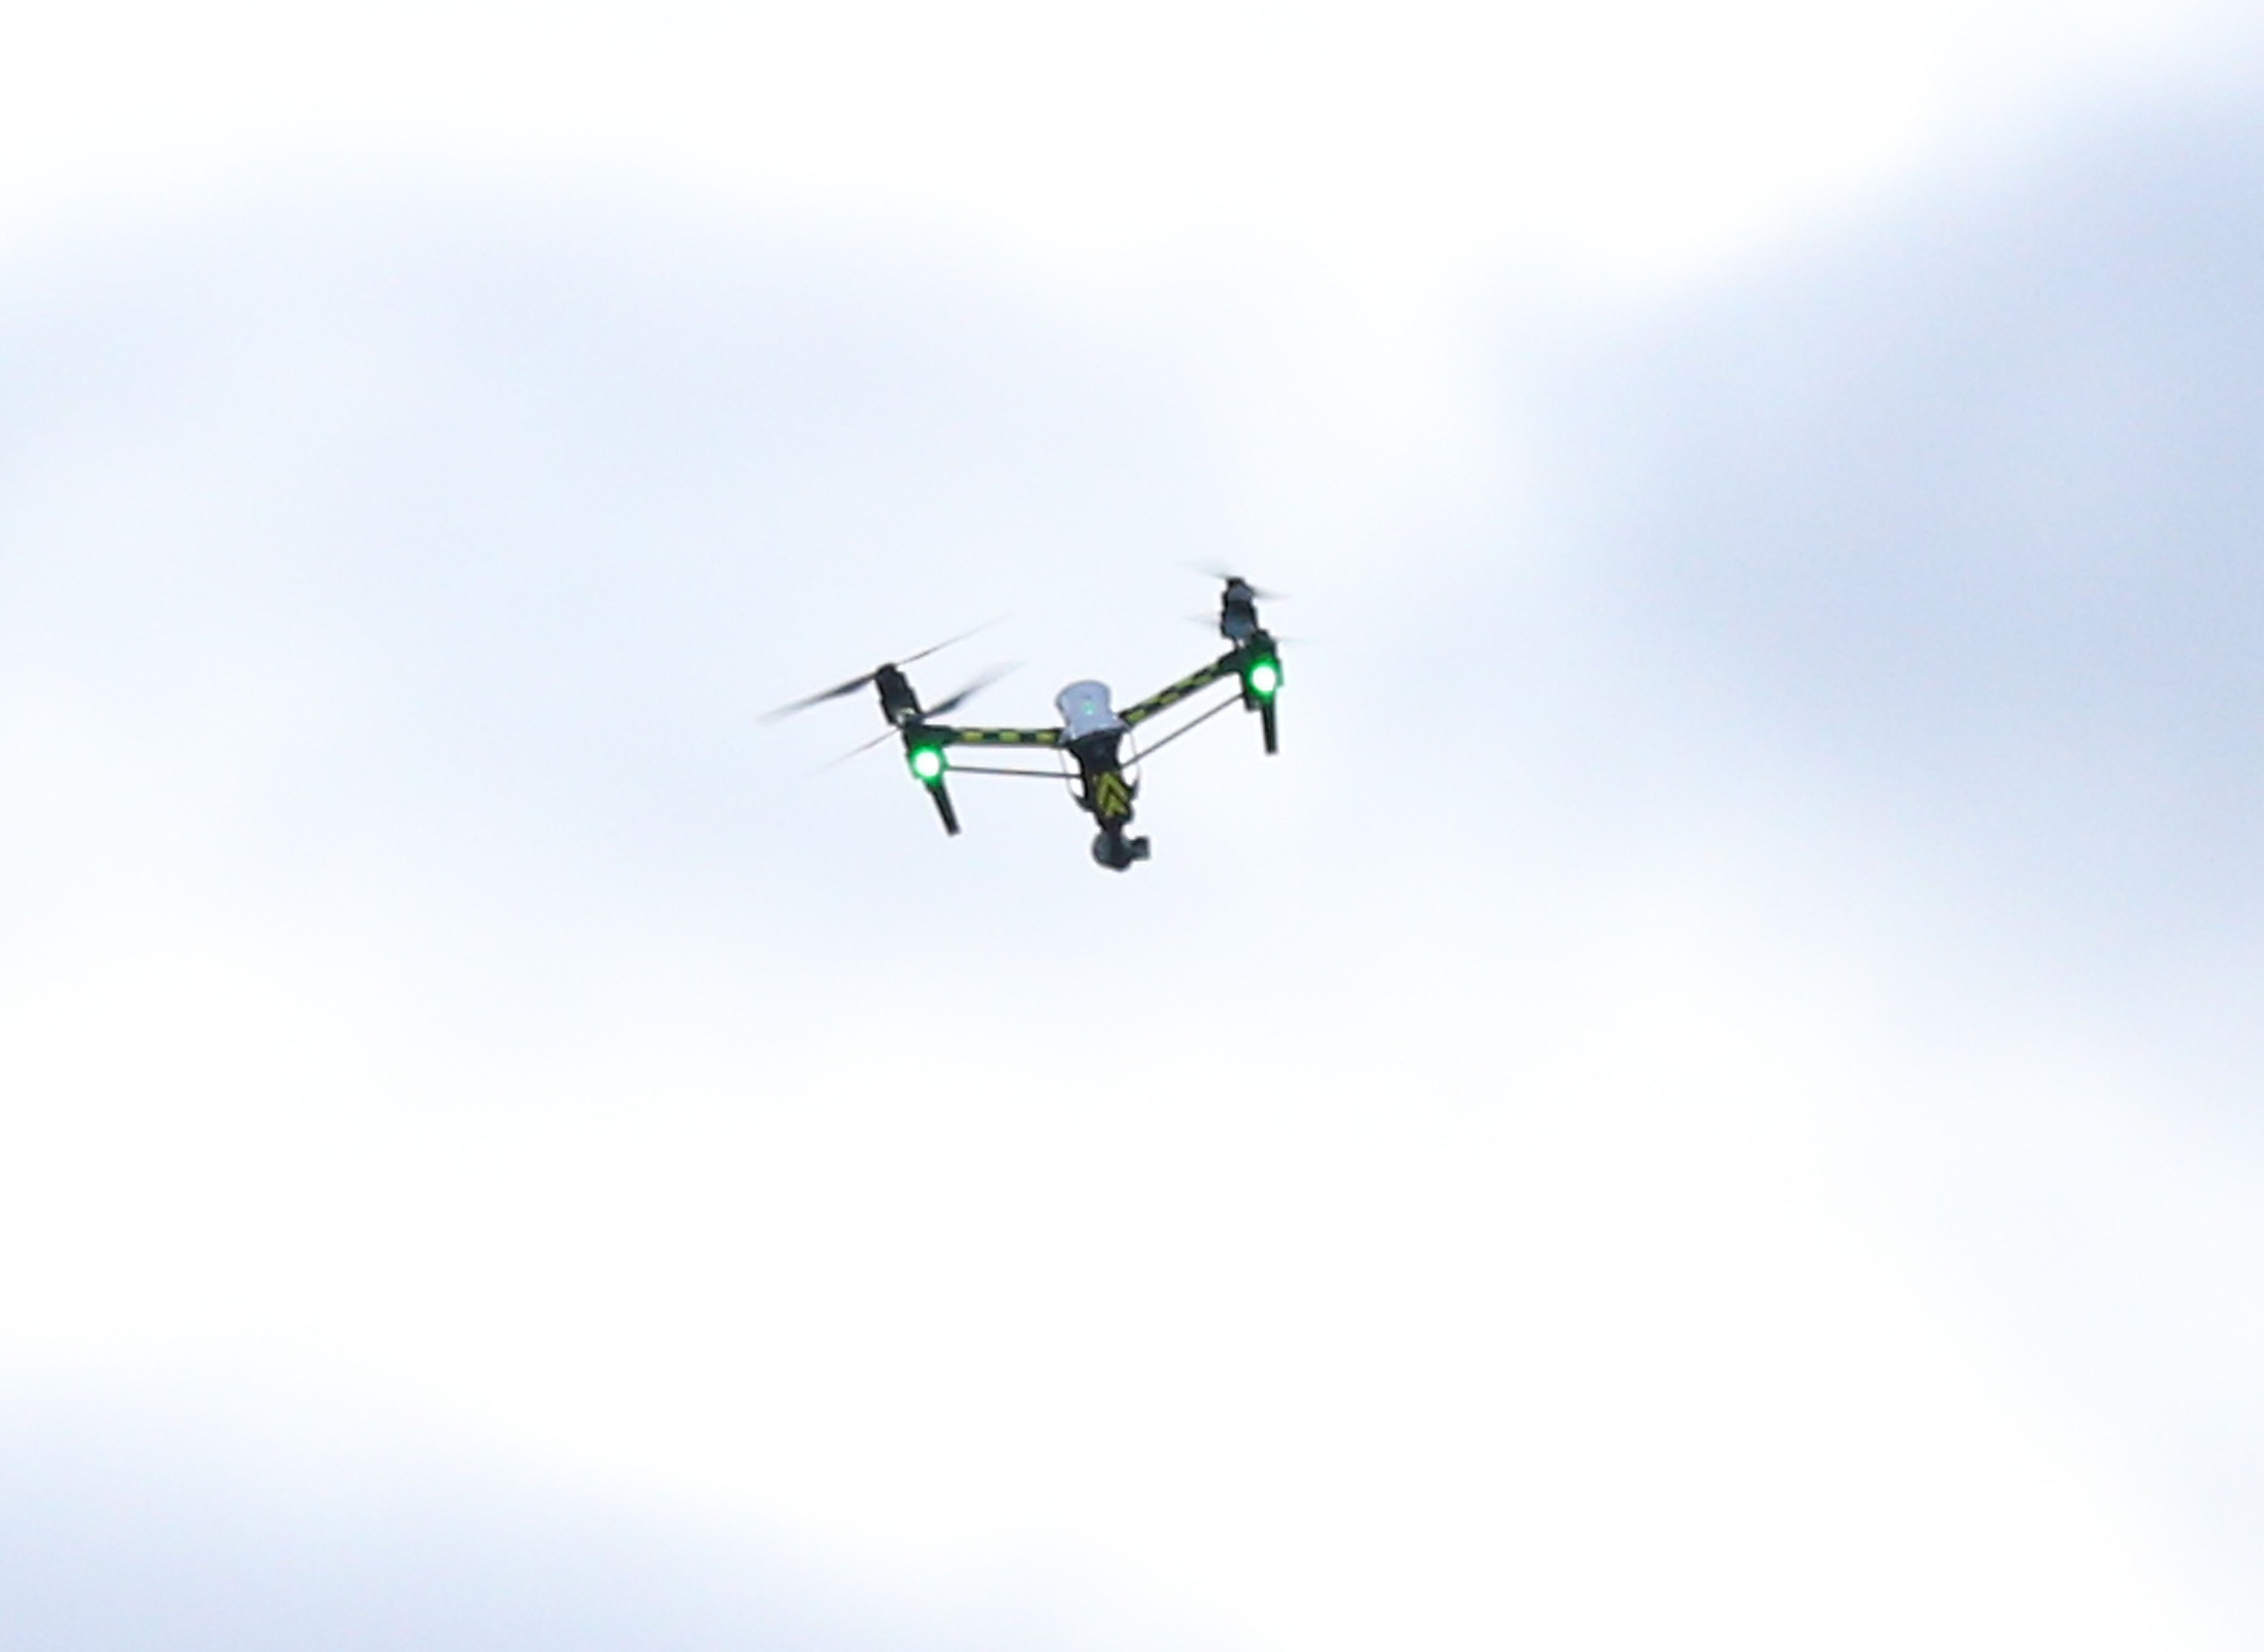 A traditional drone hovers in the air